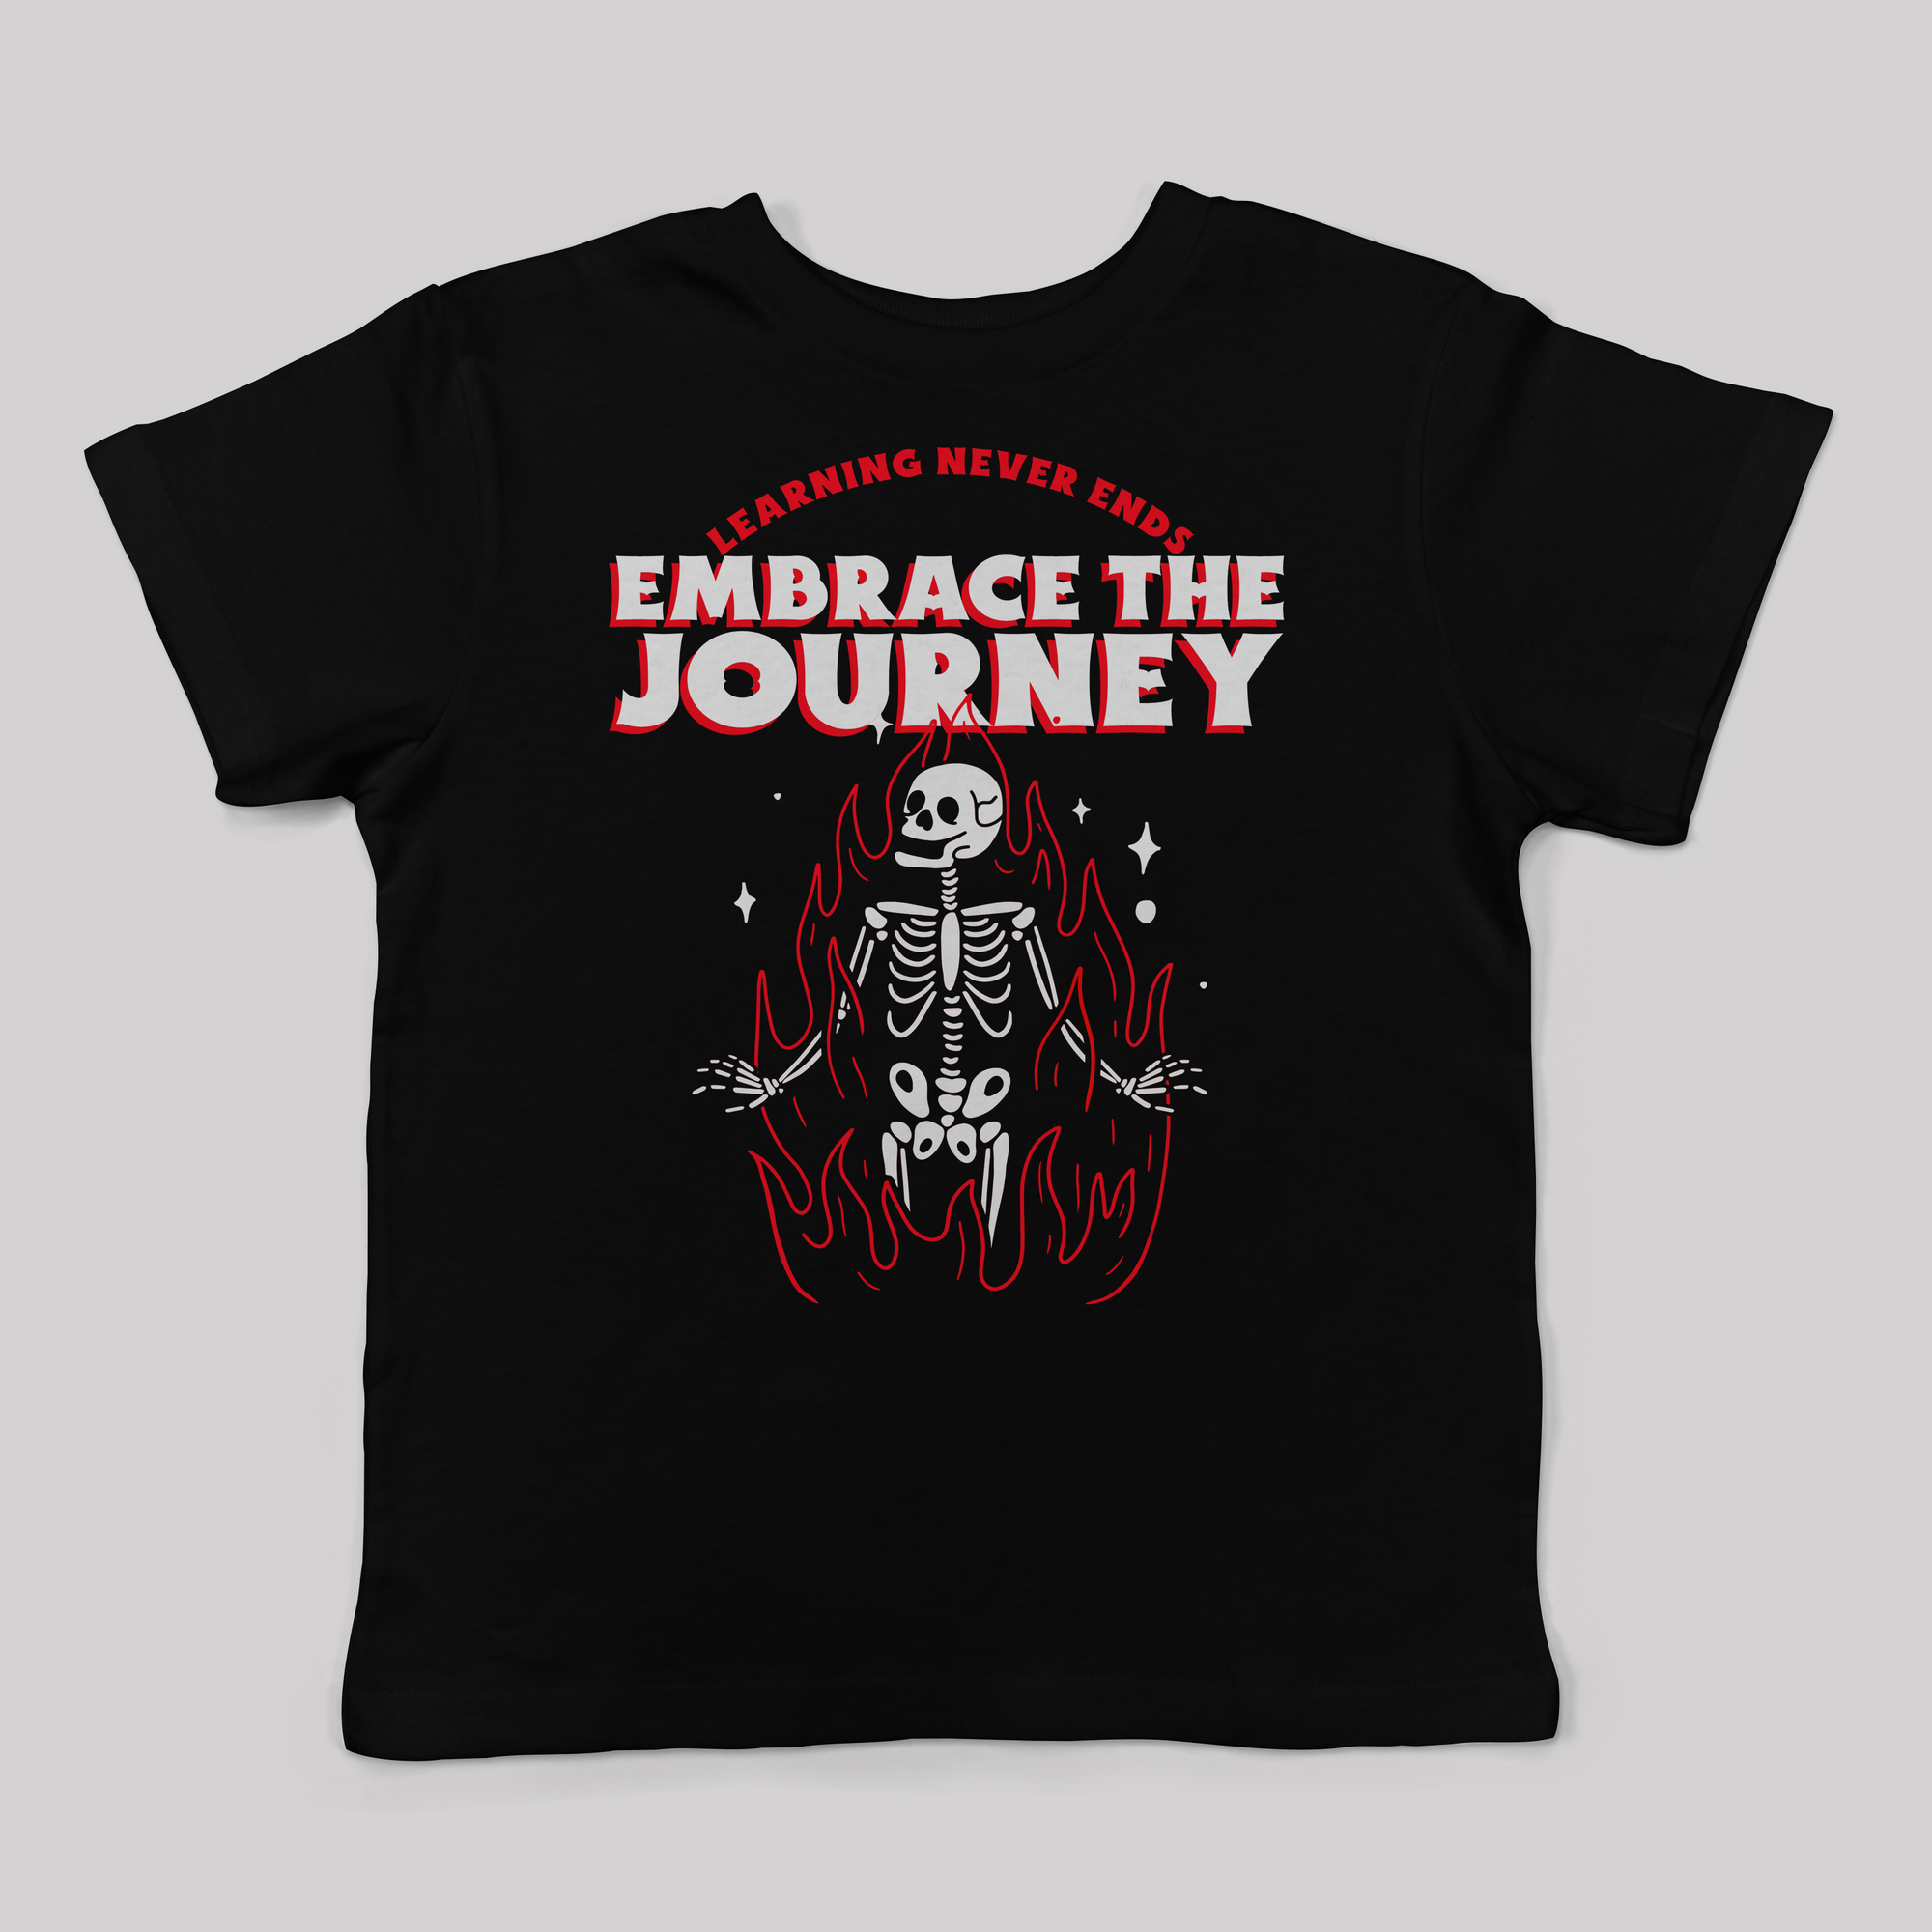 Learning is a Journey Tee for Kids